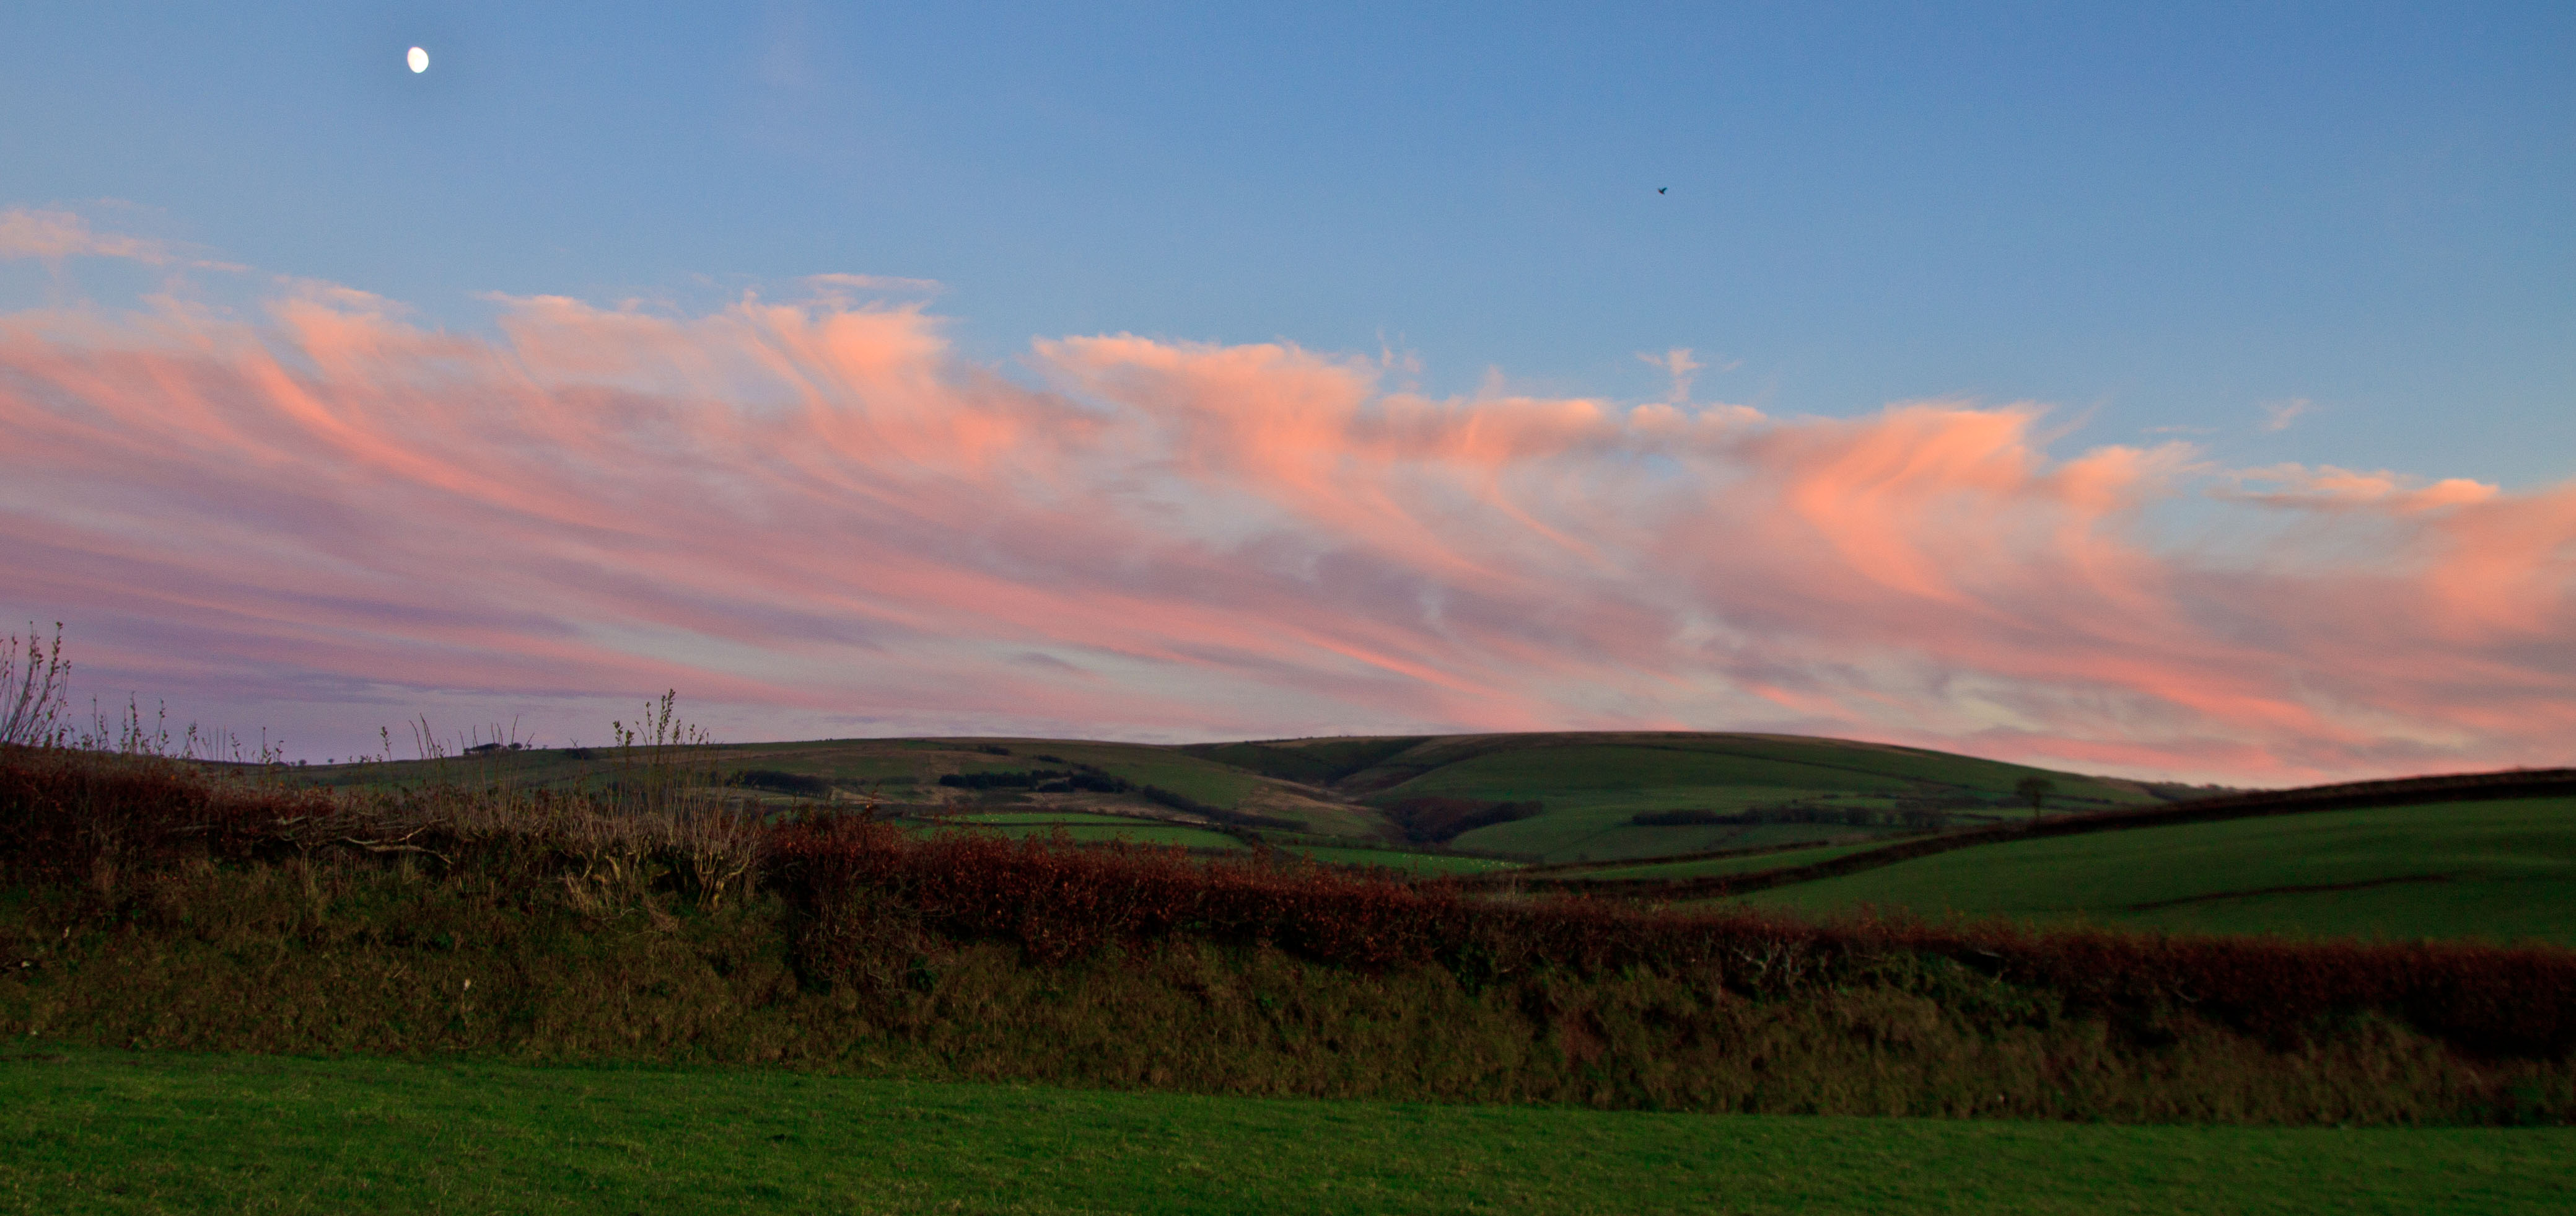 Dramatic clouds lit by the setting sun over Exmoor near Challacombe